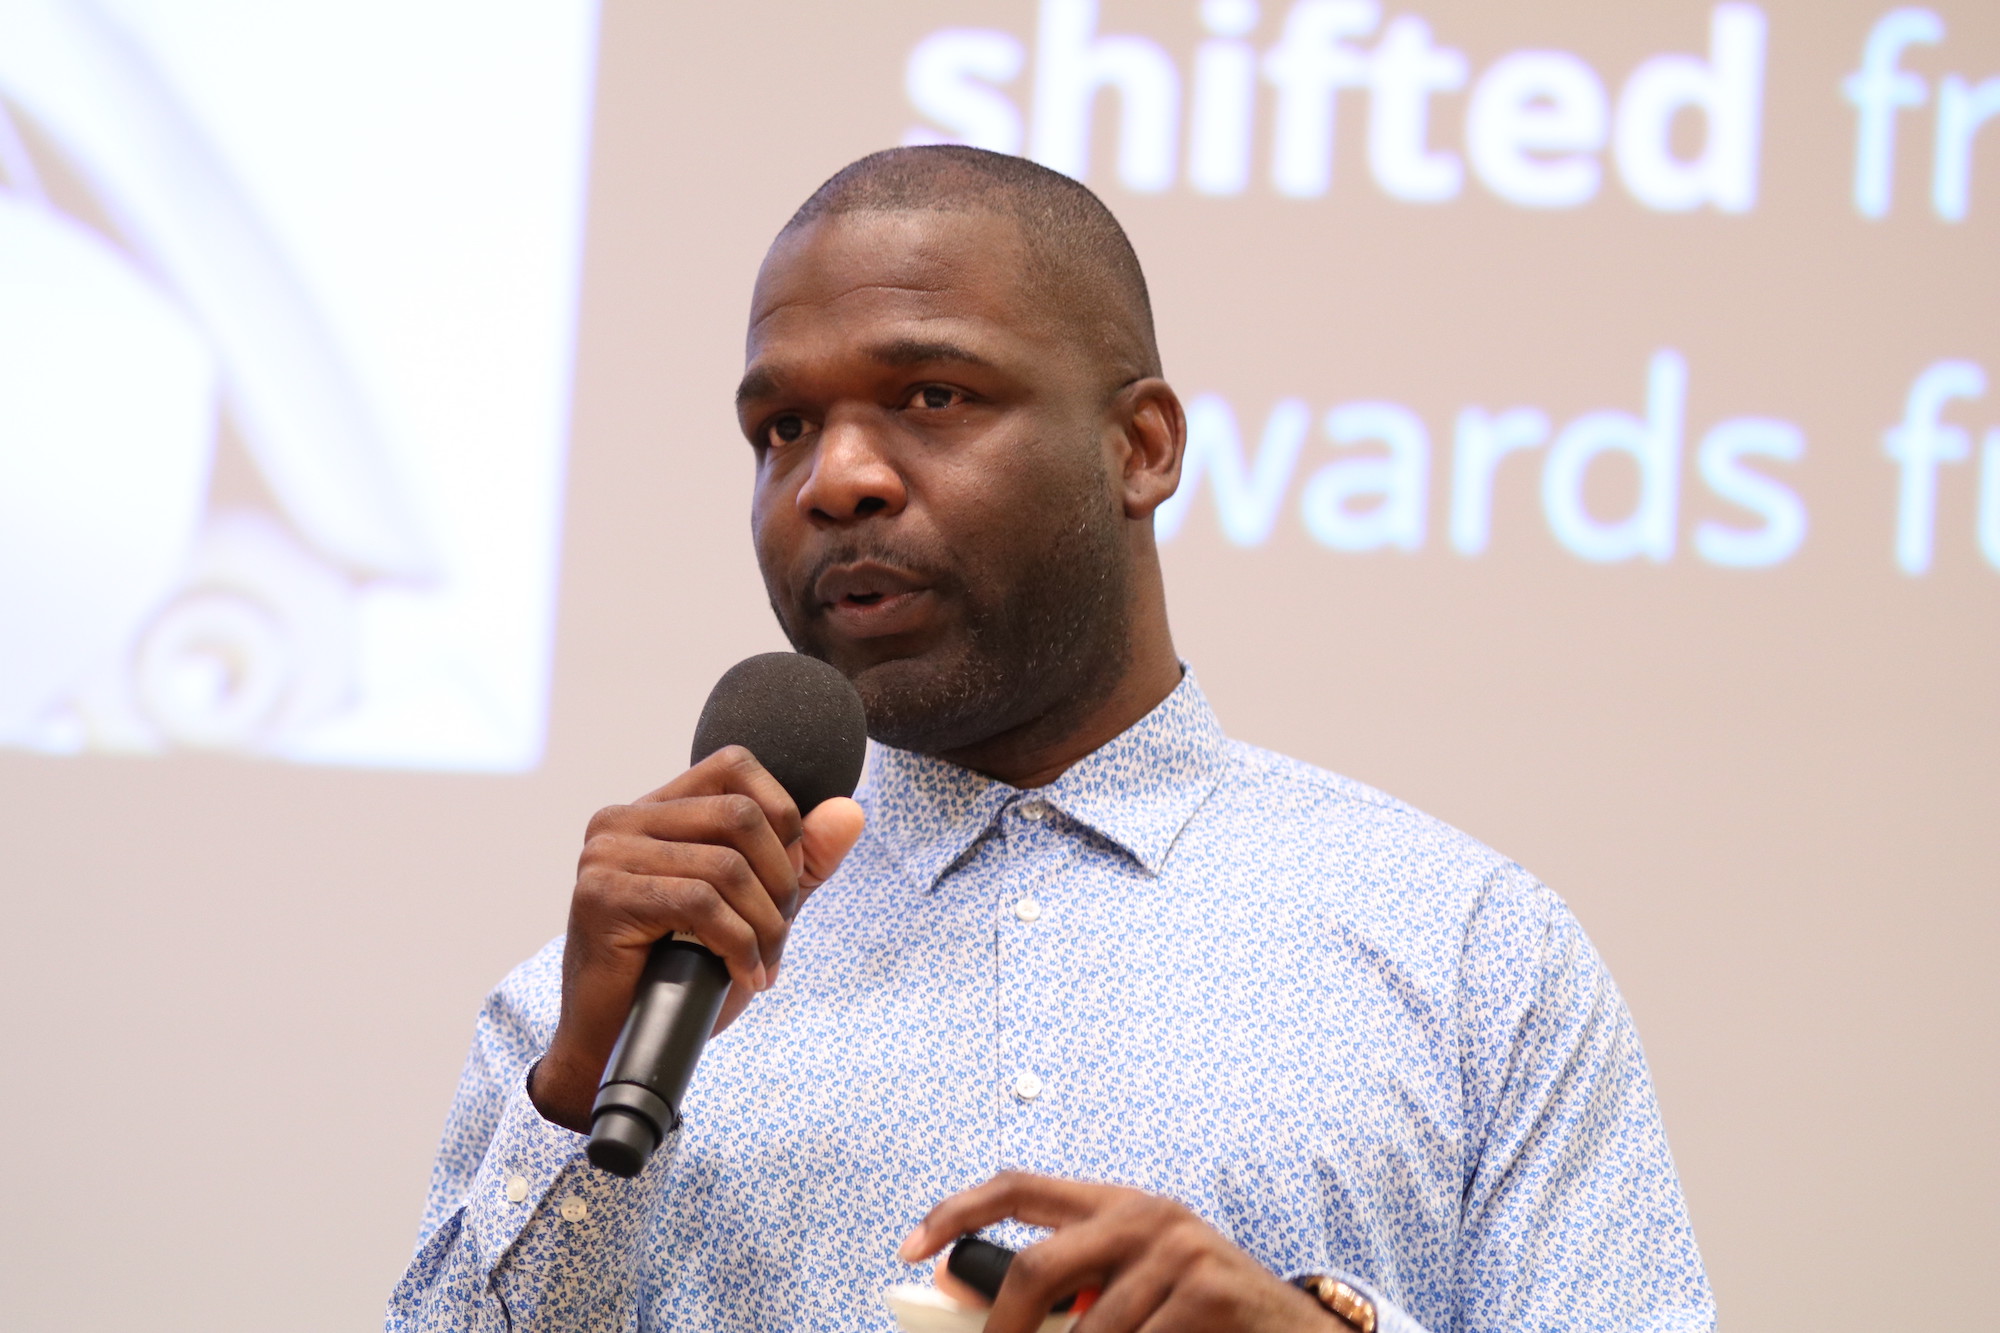 A close up photo of an African American male student speaking into a microphone, wearing a blue professional shirt